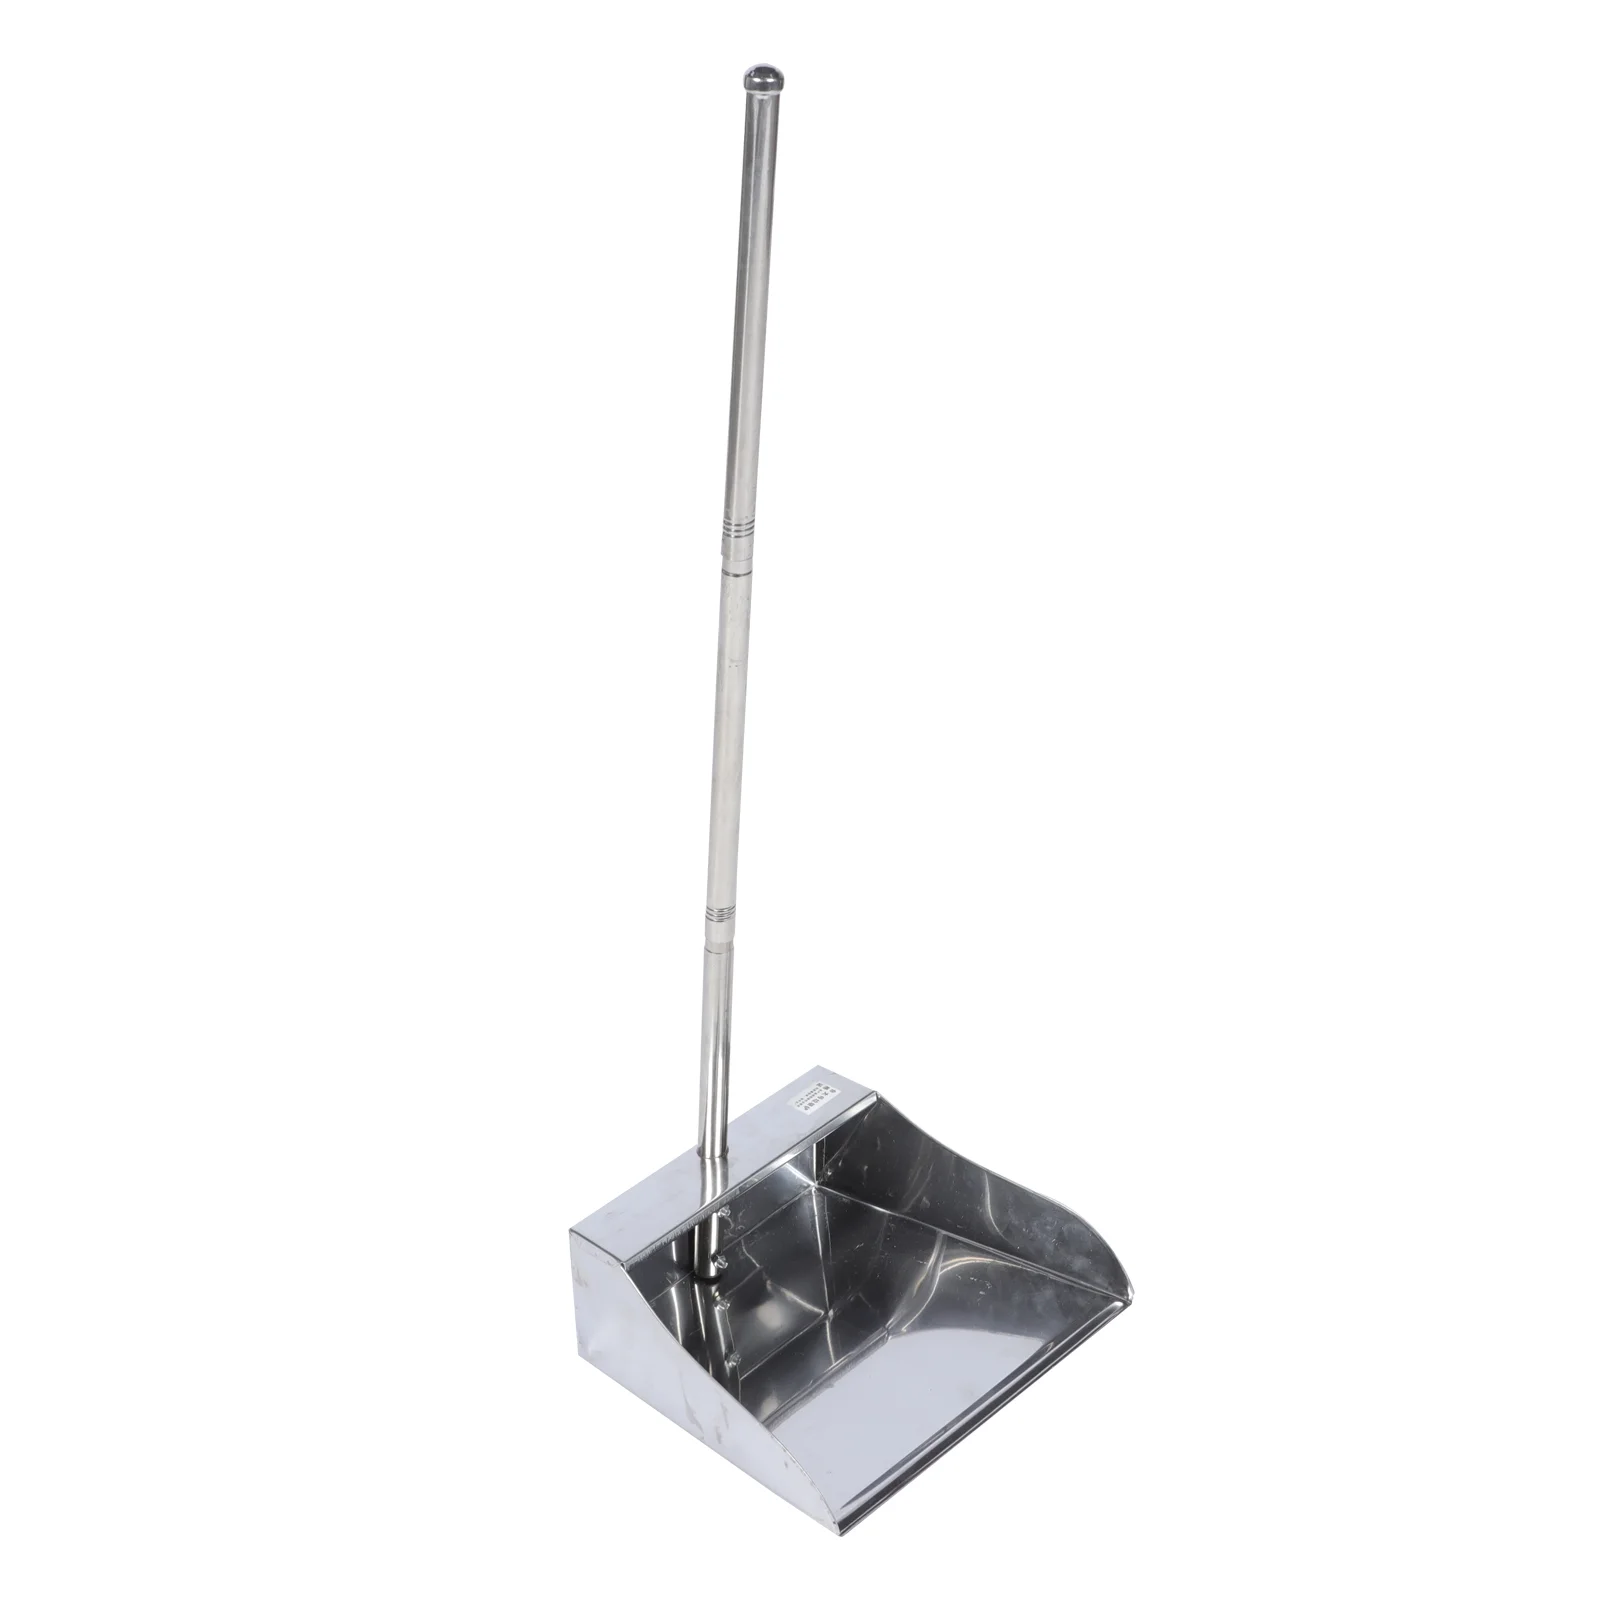 

Dustpan Pan Handle Cleaning Metal Upright Dustpans Pans Stainless Steel Kitchen Broom Garbage Handled Stand Up Heavy Duty Trash